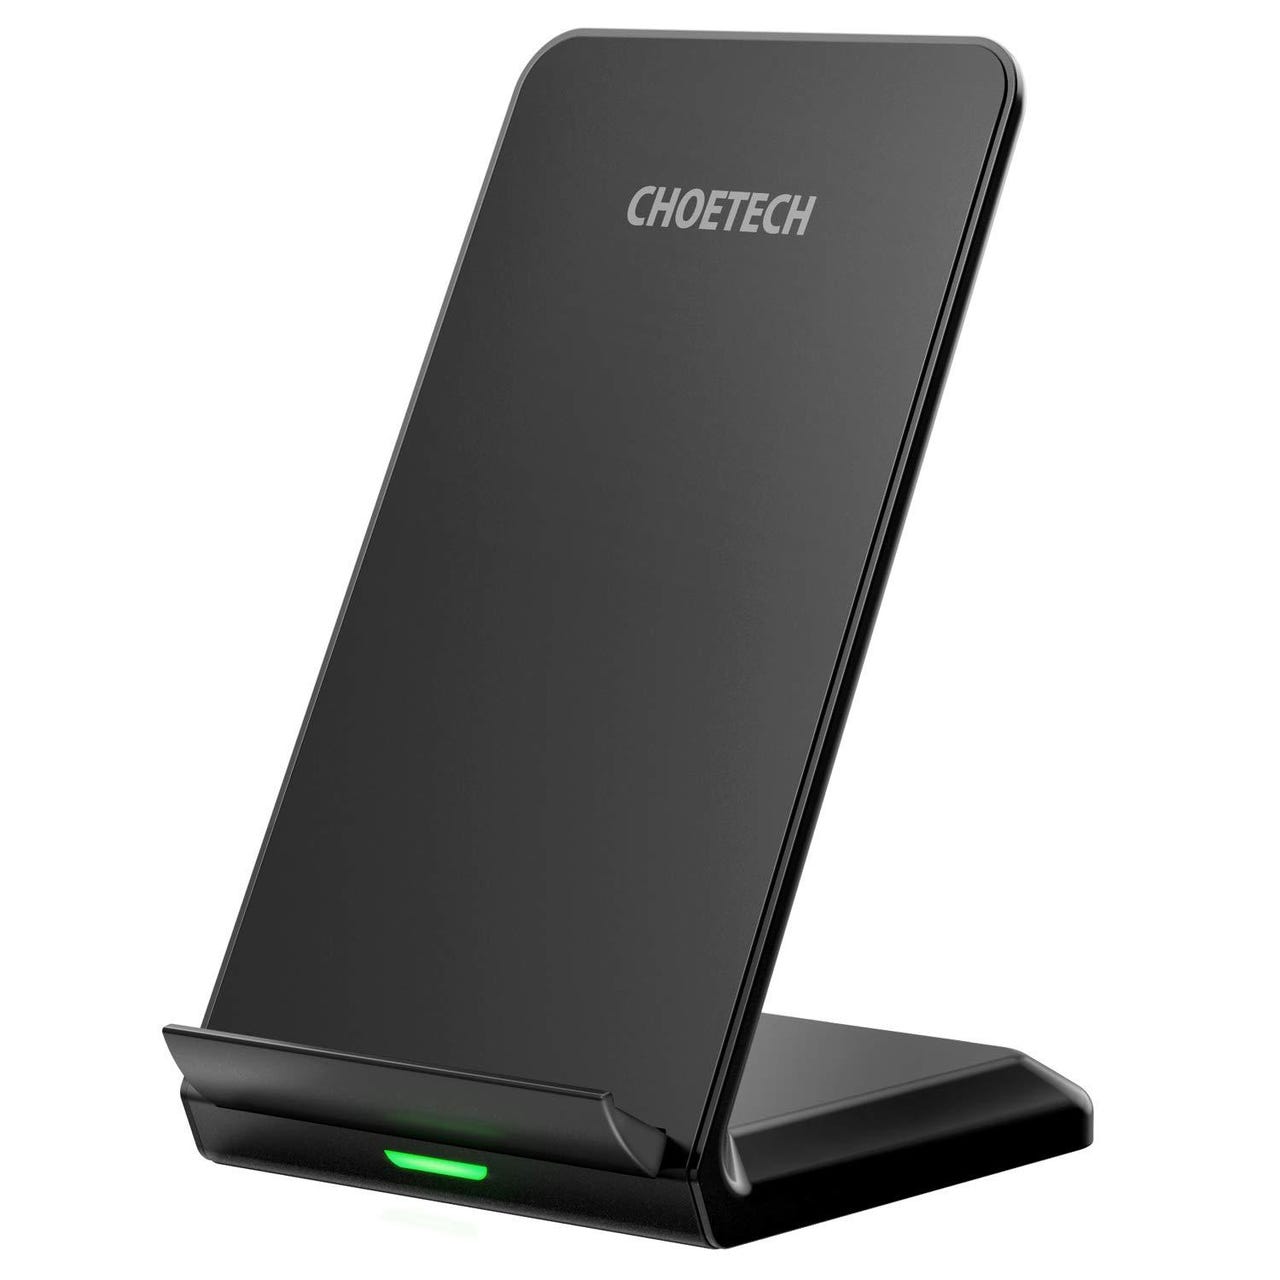 CHOETECH Fast Wireless Charger, Qi-Certified